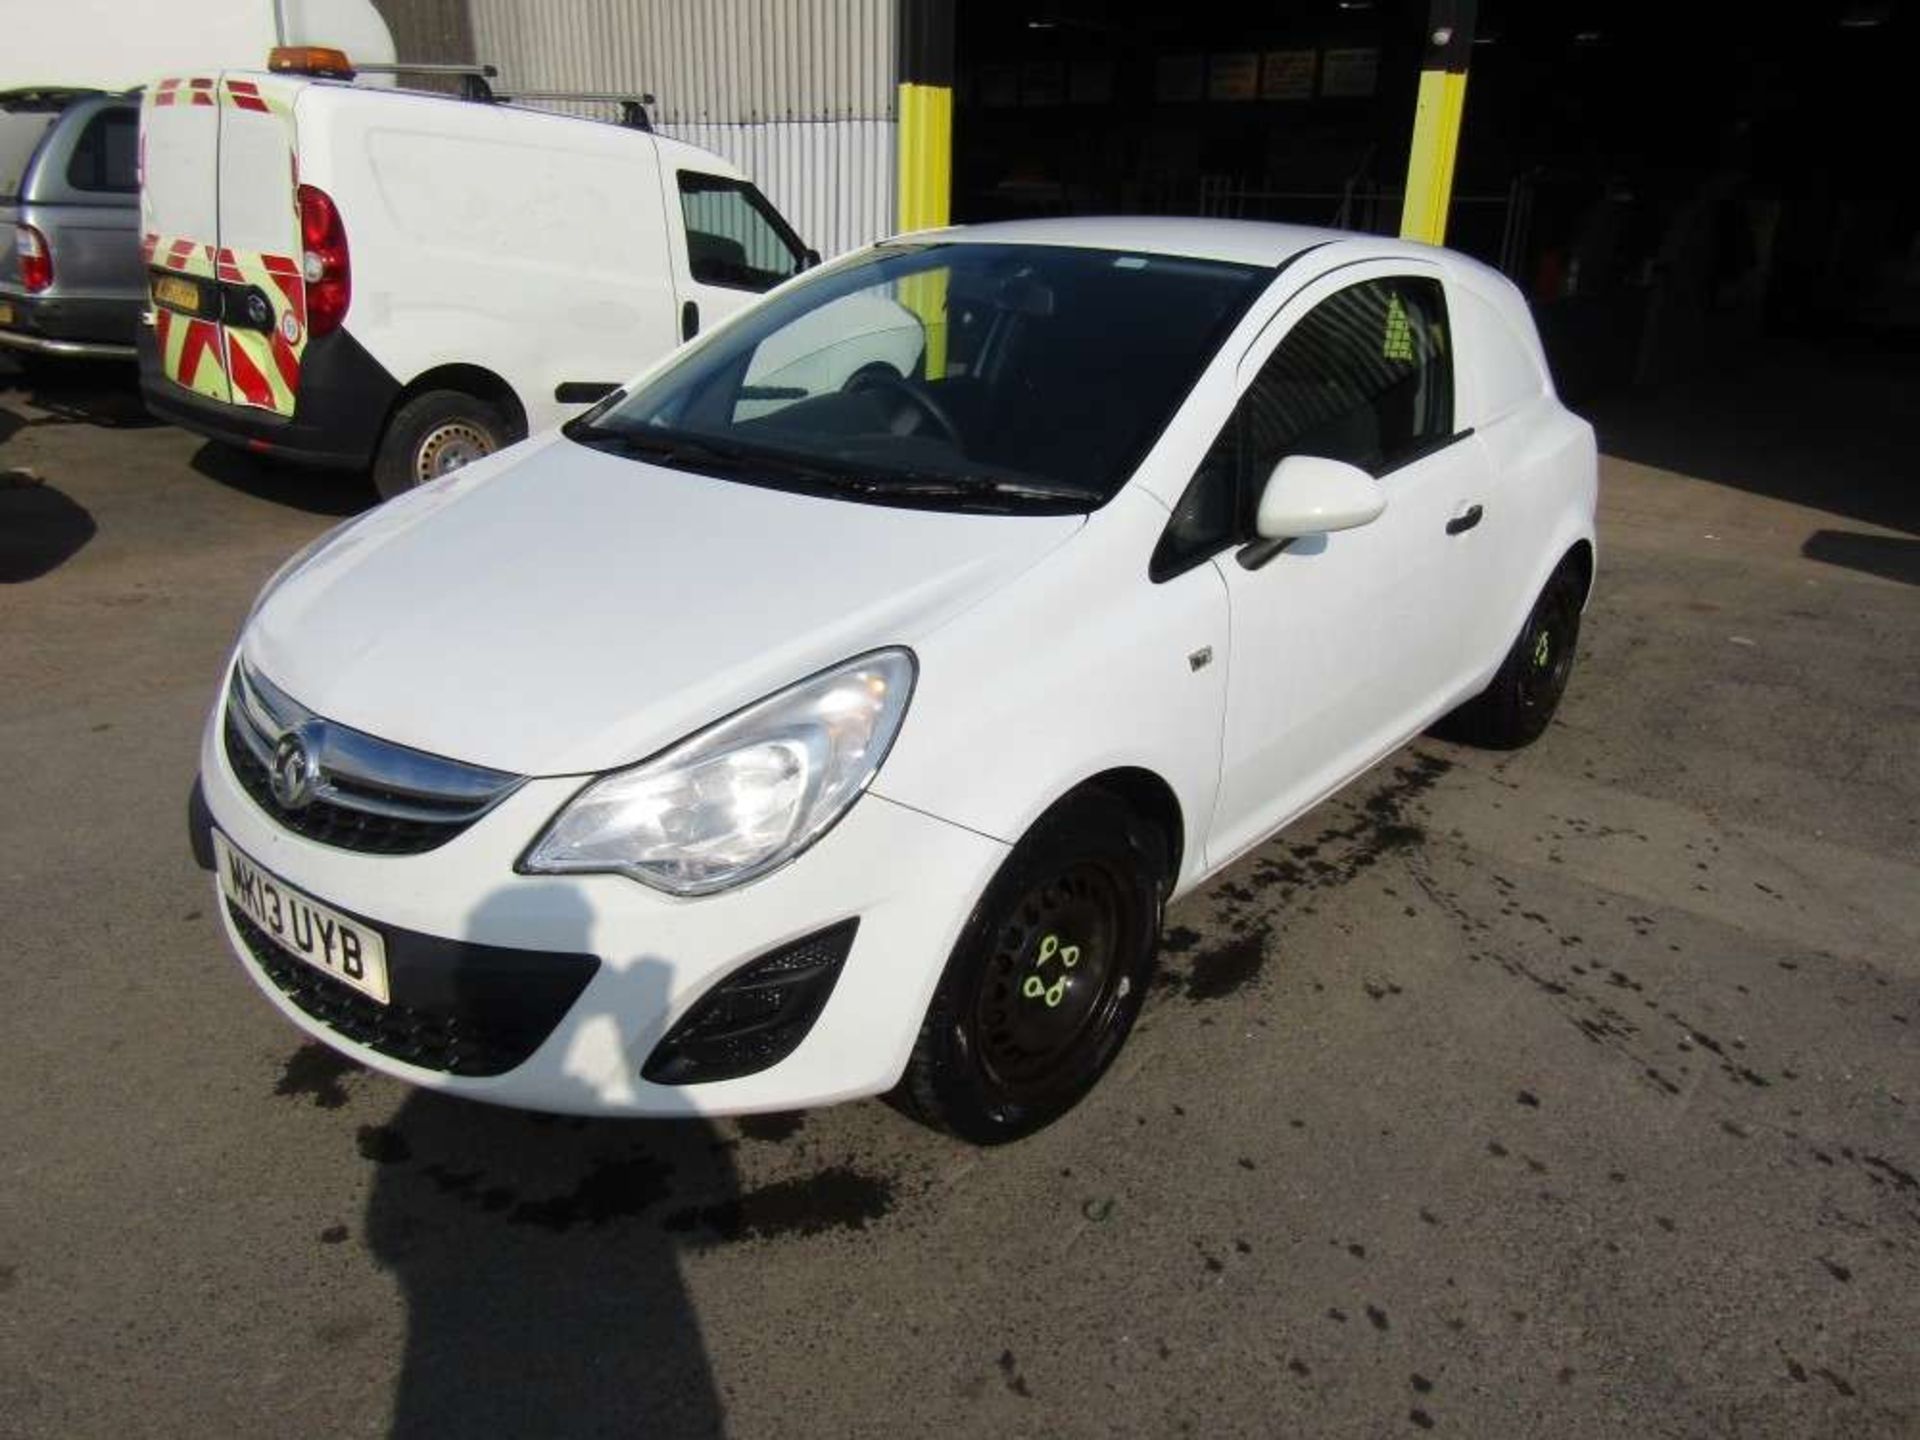 2013 13 reg Vauxhall Corsa CDTI (Runs & Drives but Suspected Gearbox Issues) (Direct ENW) - Image 2 of 7